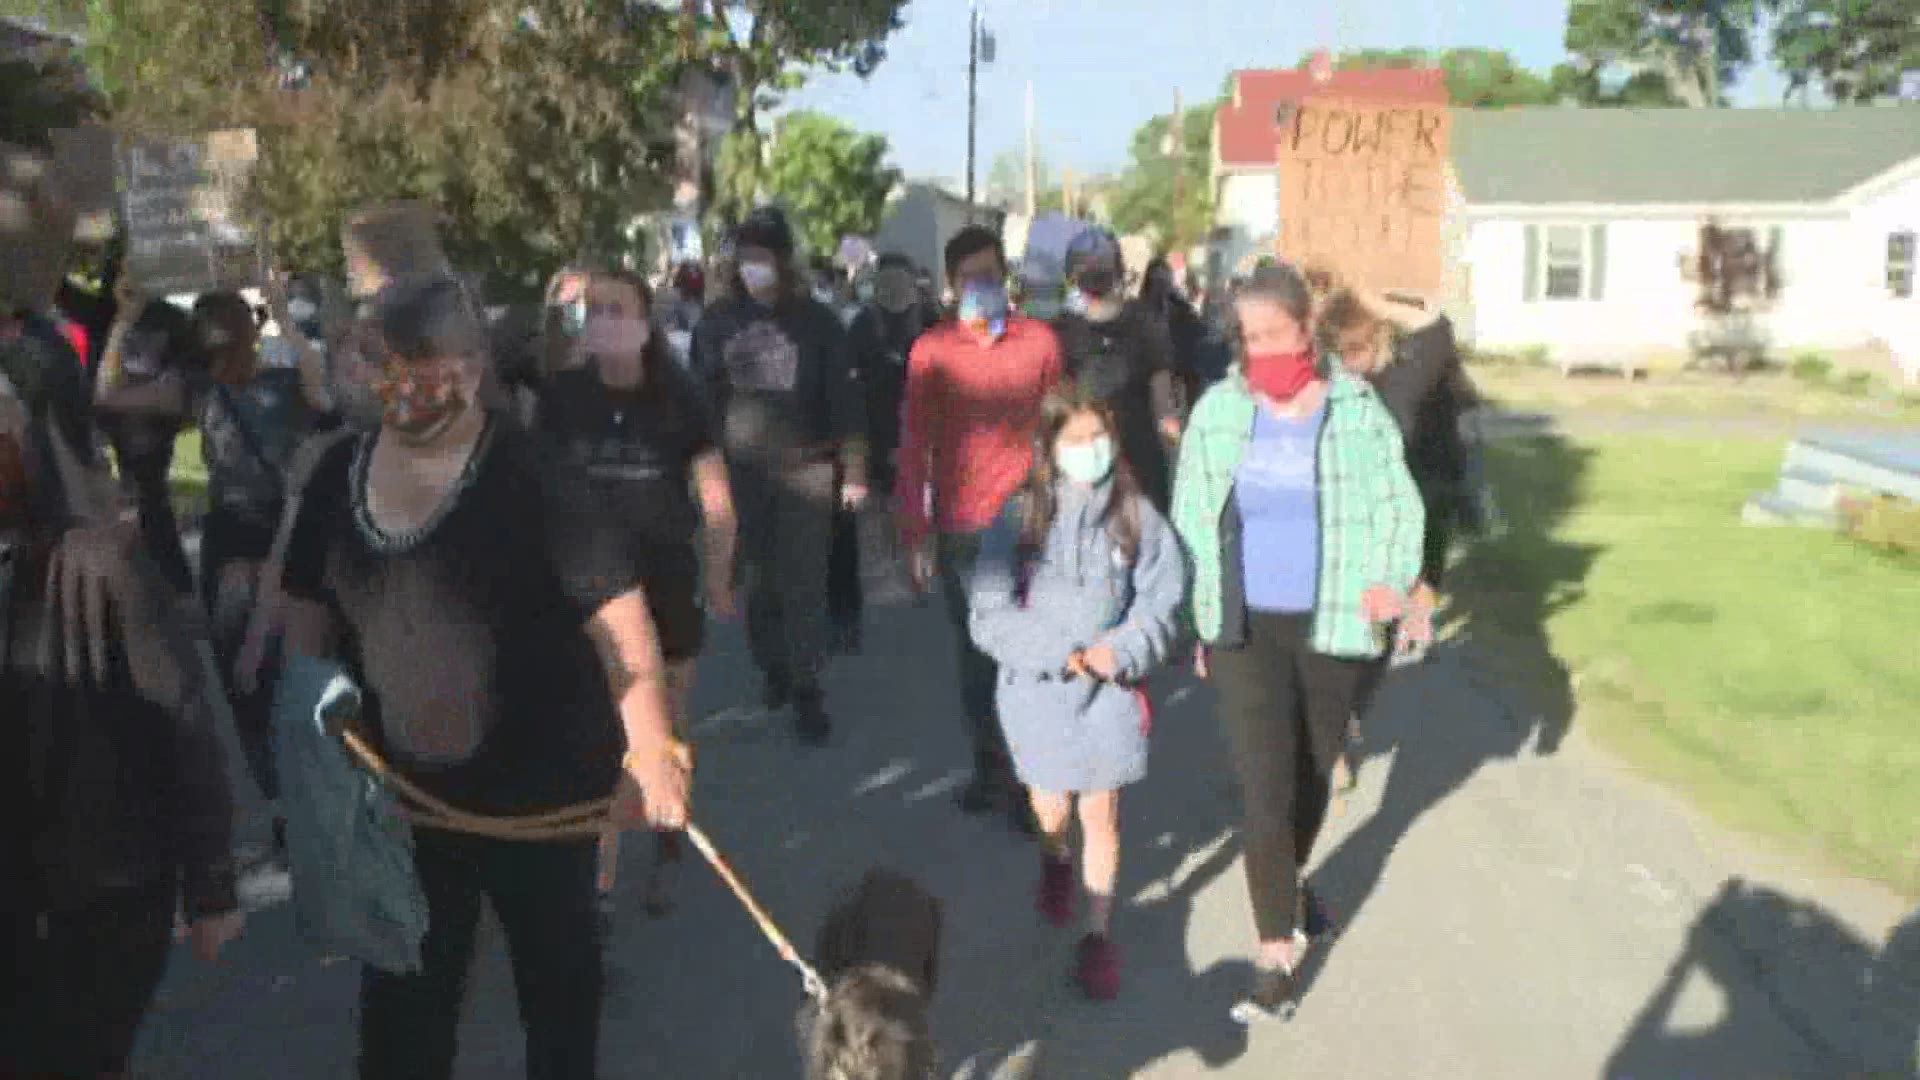 Another black lives Matter protest is underway in Bar Harbor.